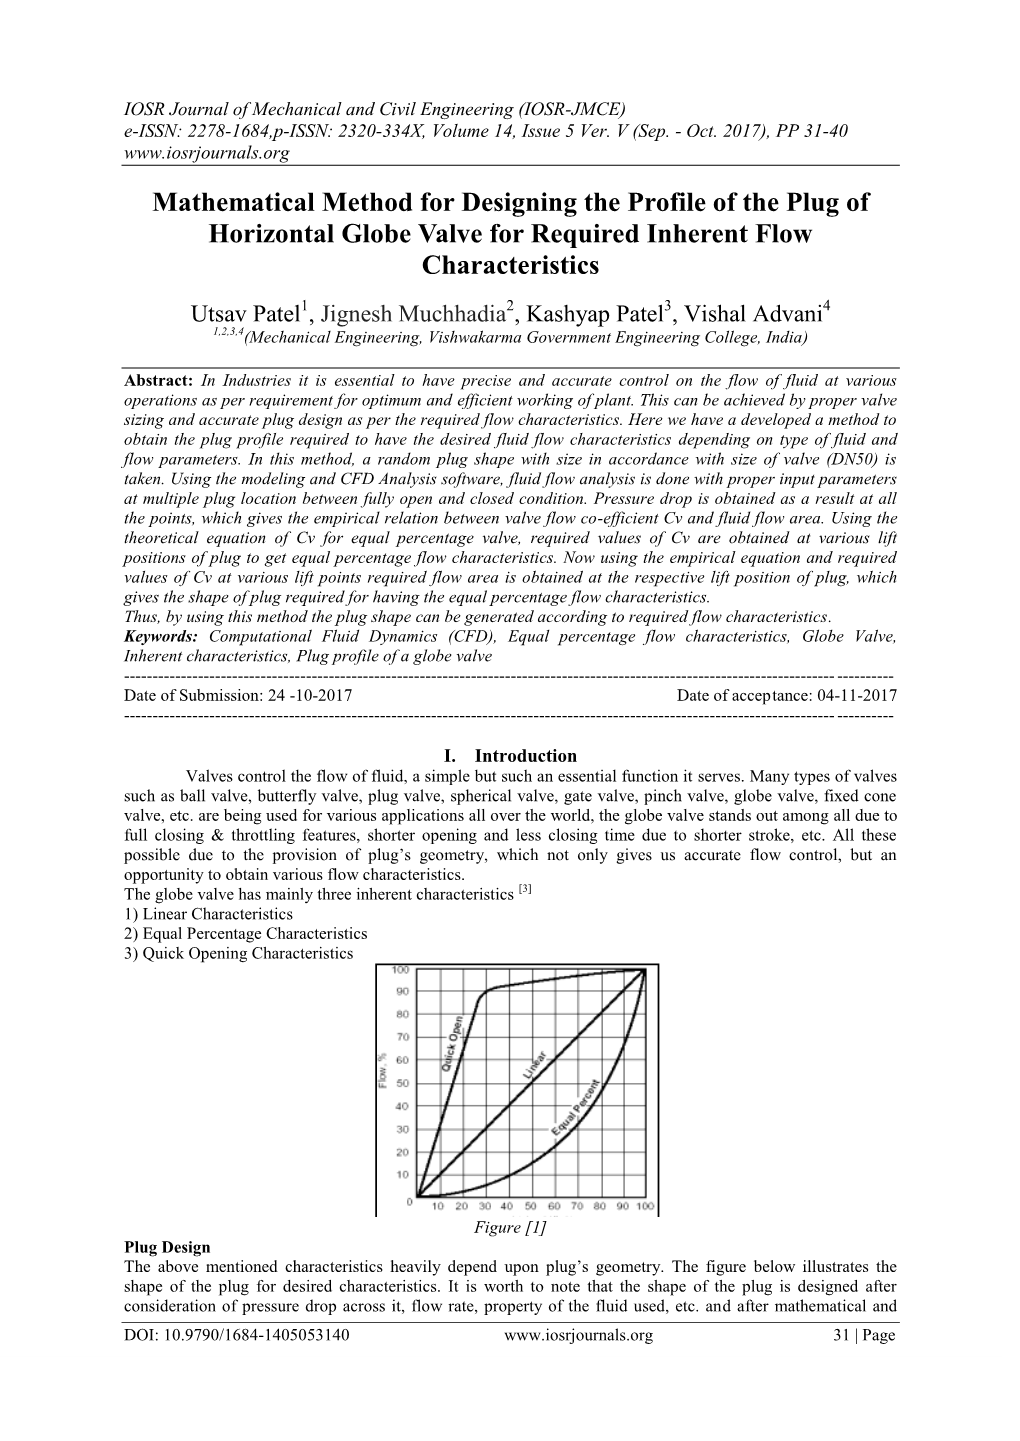 Mathematical Method for Designing the Profile of the Plug of Horizontal Globe Valve for Required Inherent Flow Characteristics